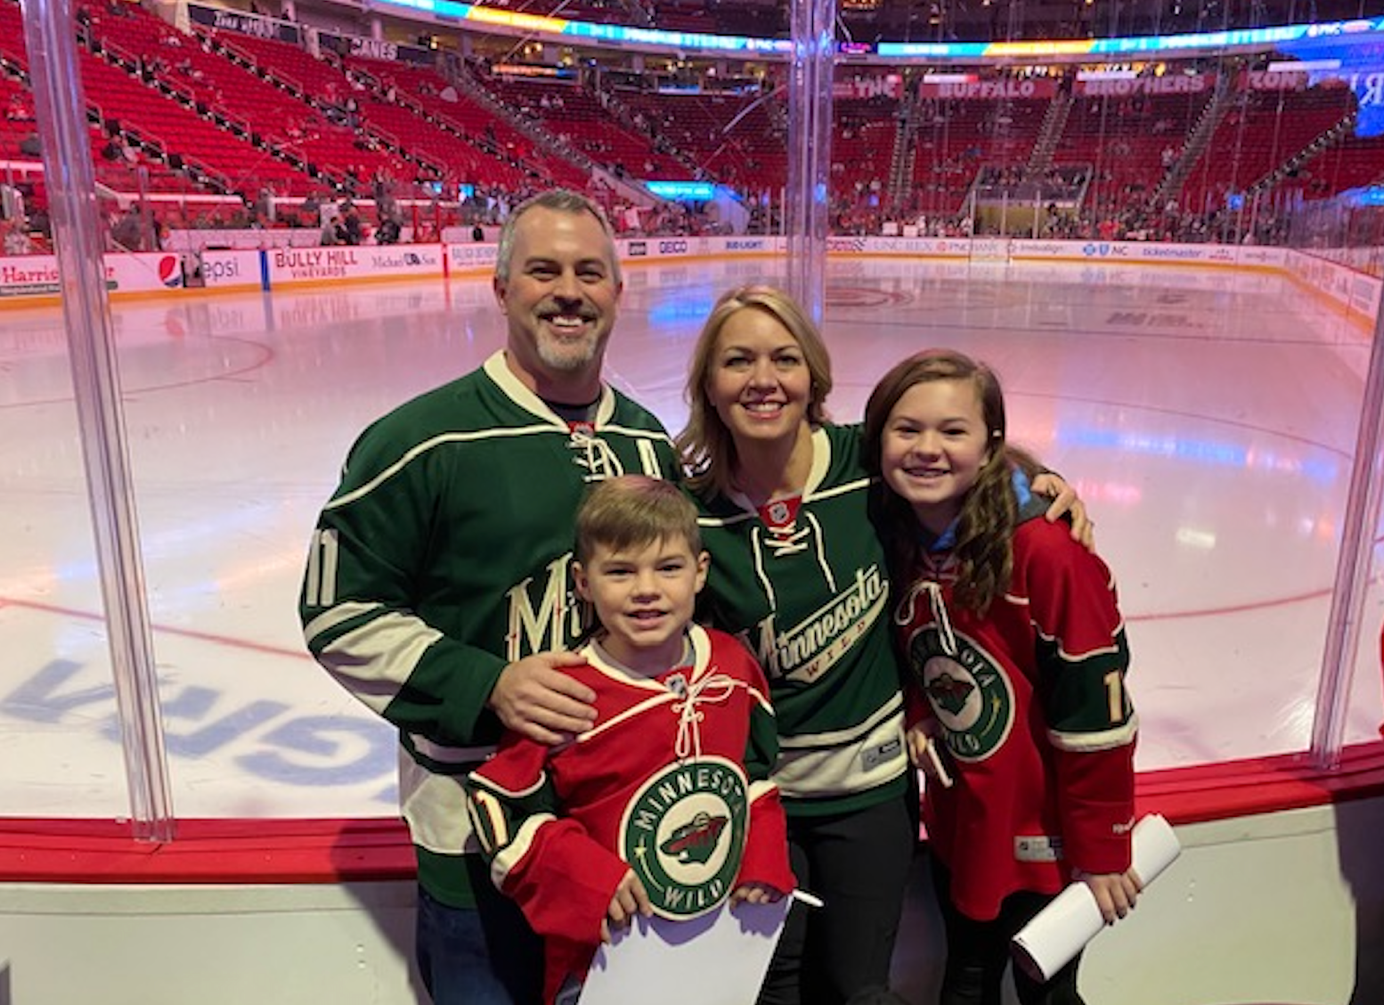 Shelly and her family pose next to the NHL ice hockey rink while all wearing Minnesota hockey jerseys.